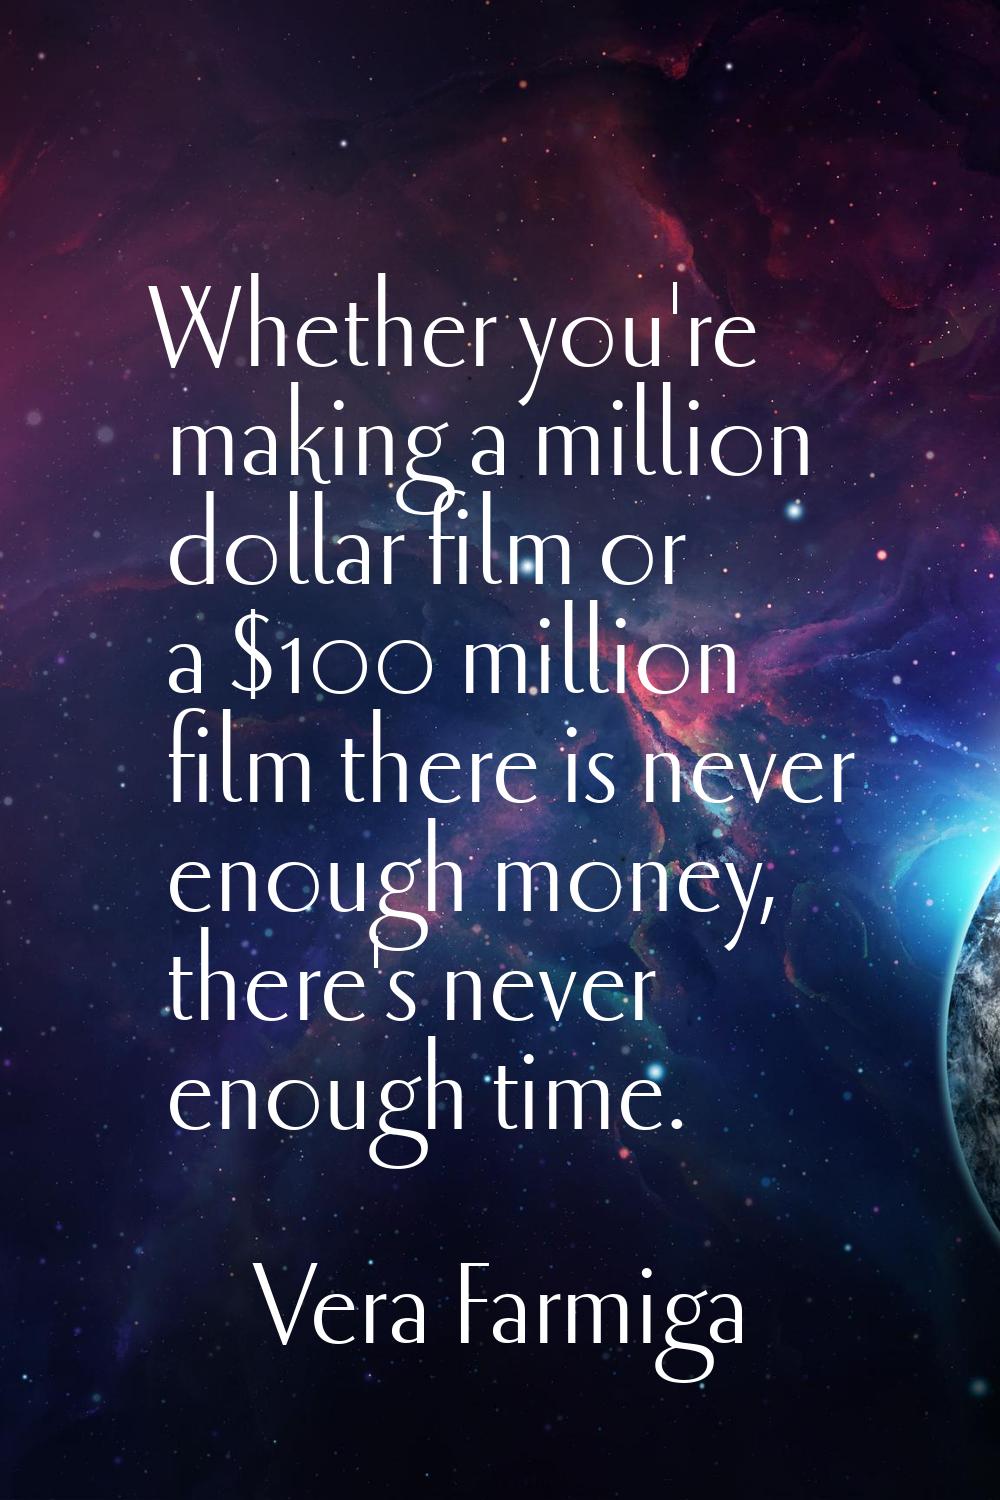 Whether you're making a million dollar film or a $100 million film there is never enough money, the